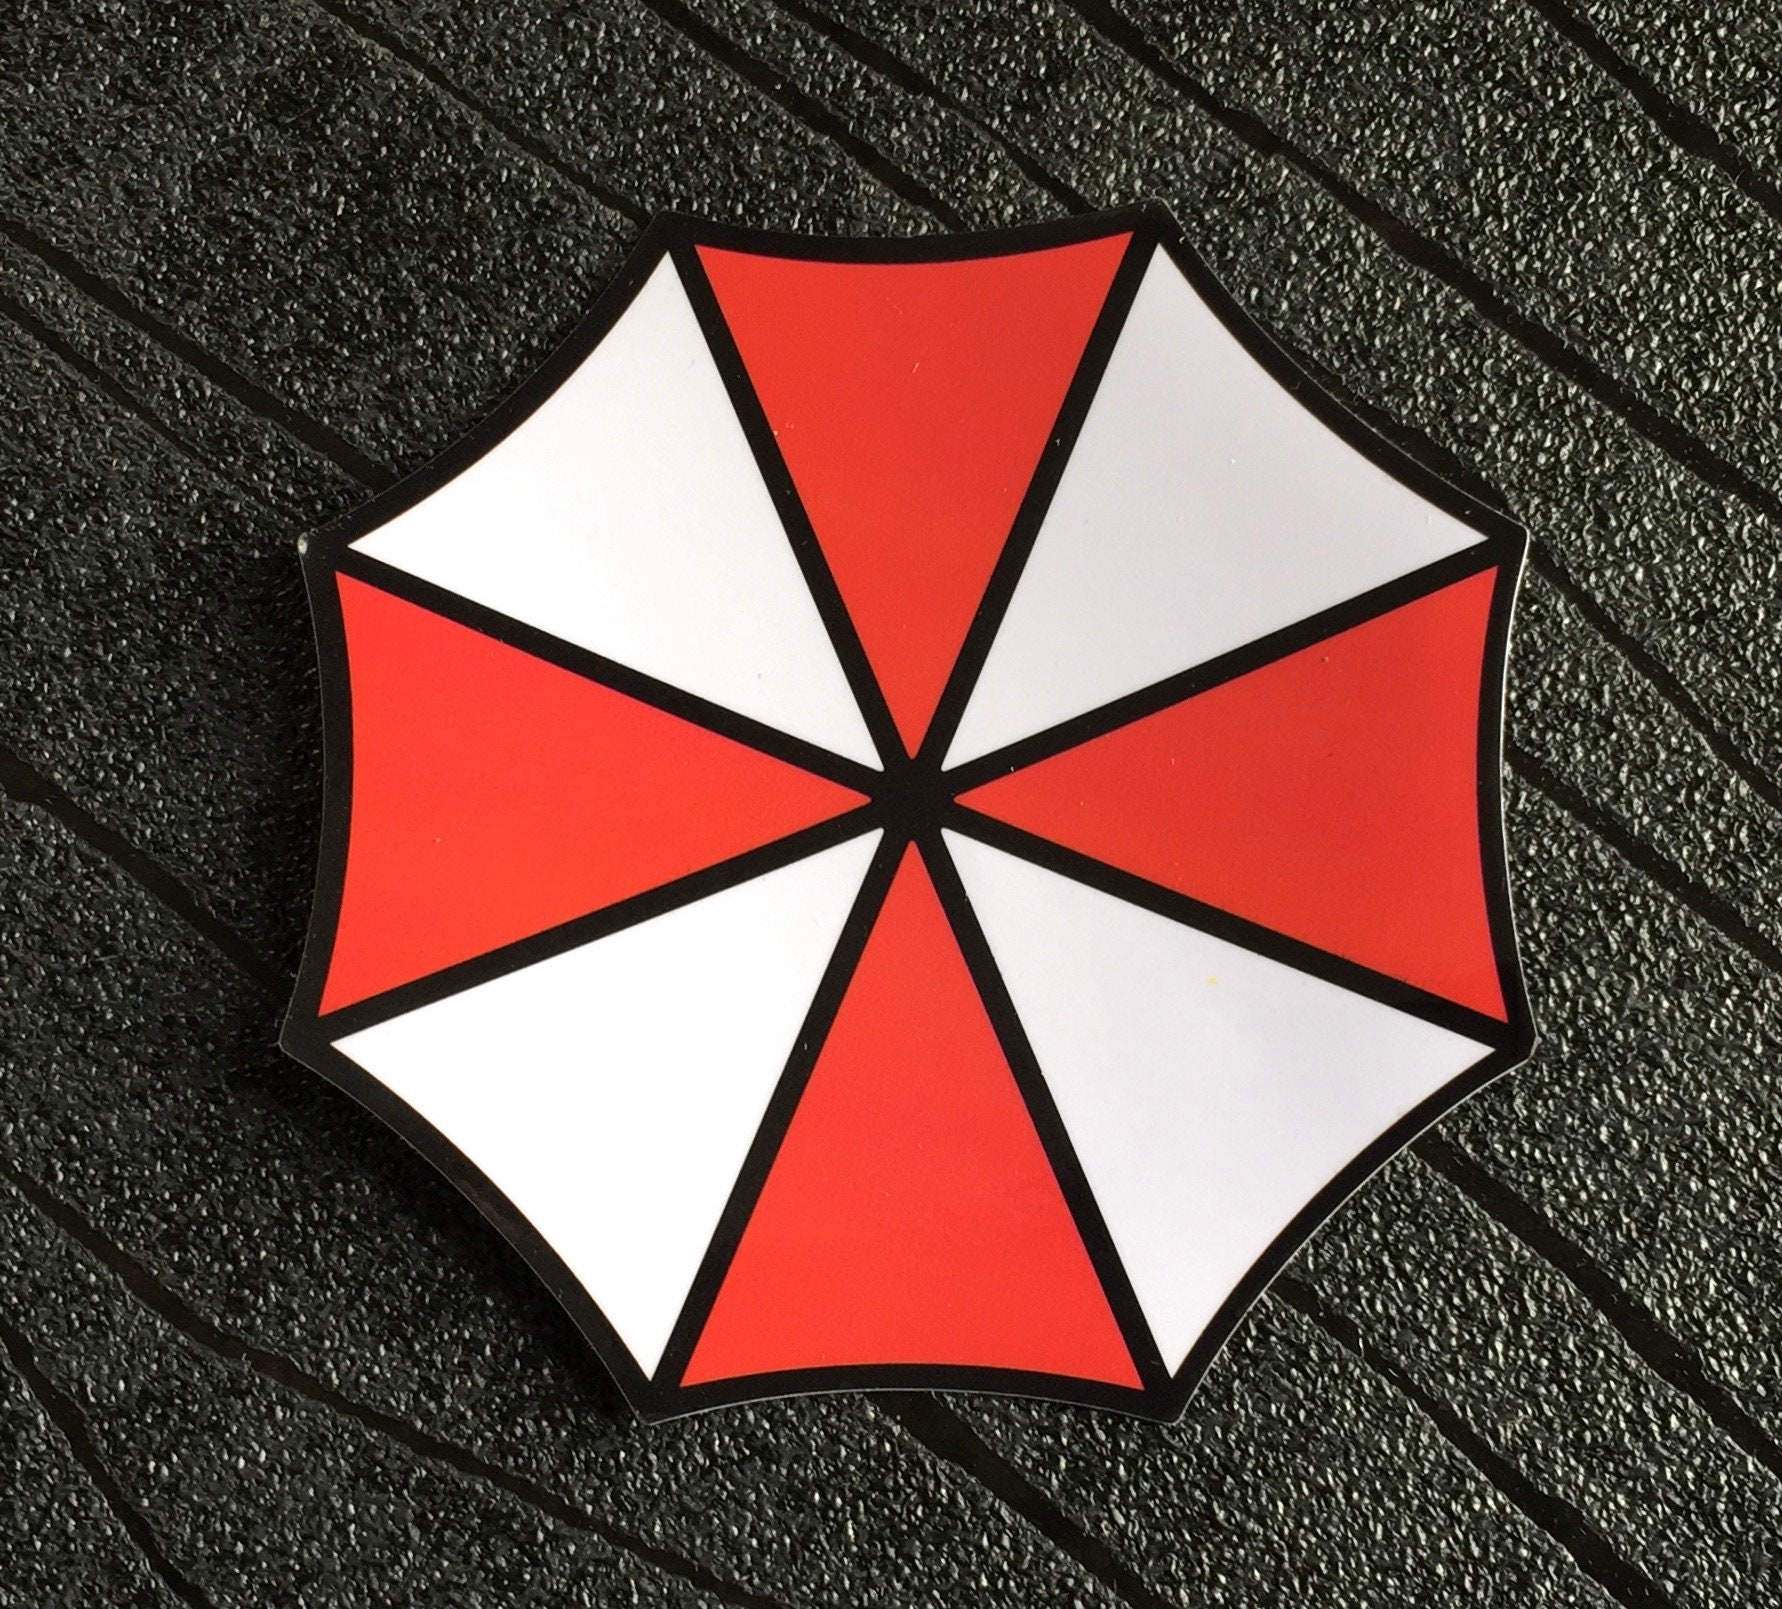 S.T.A.R.S. and Umbrella Corporation Waterproof and UV Resistant PVC Sticker  3 Pack 